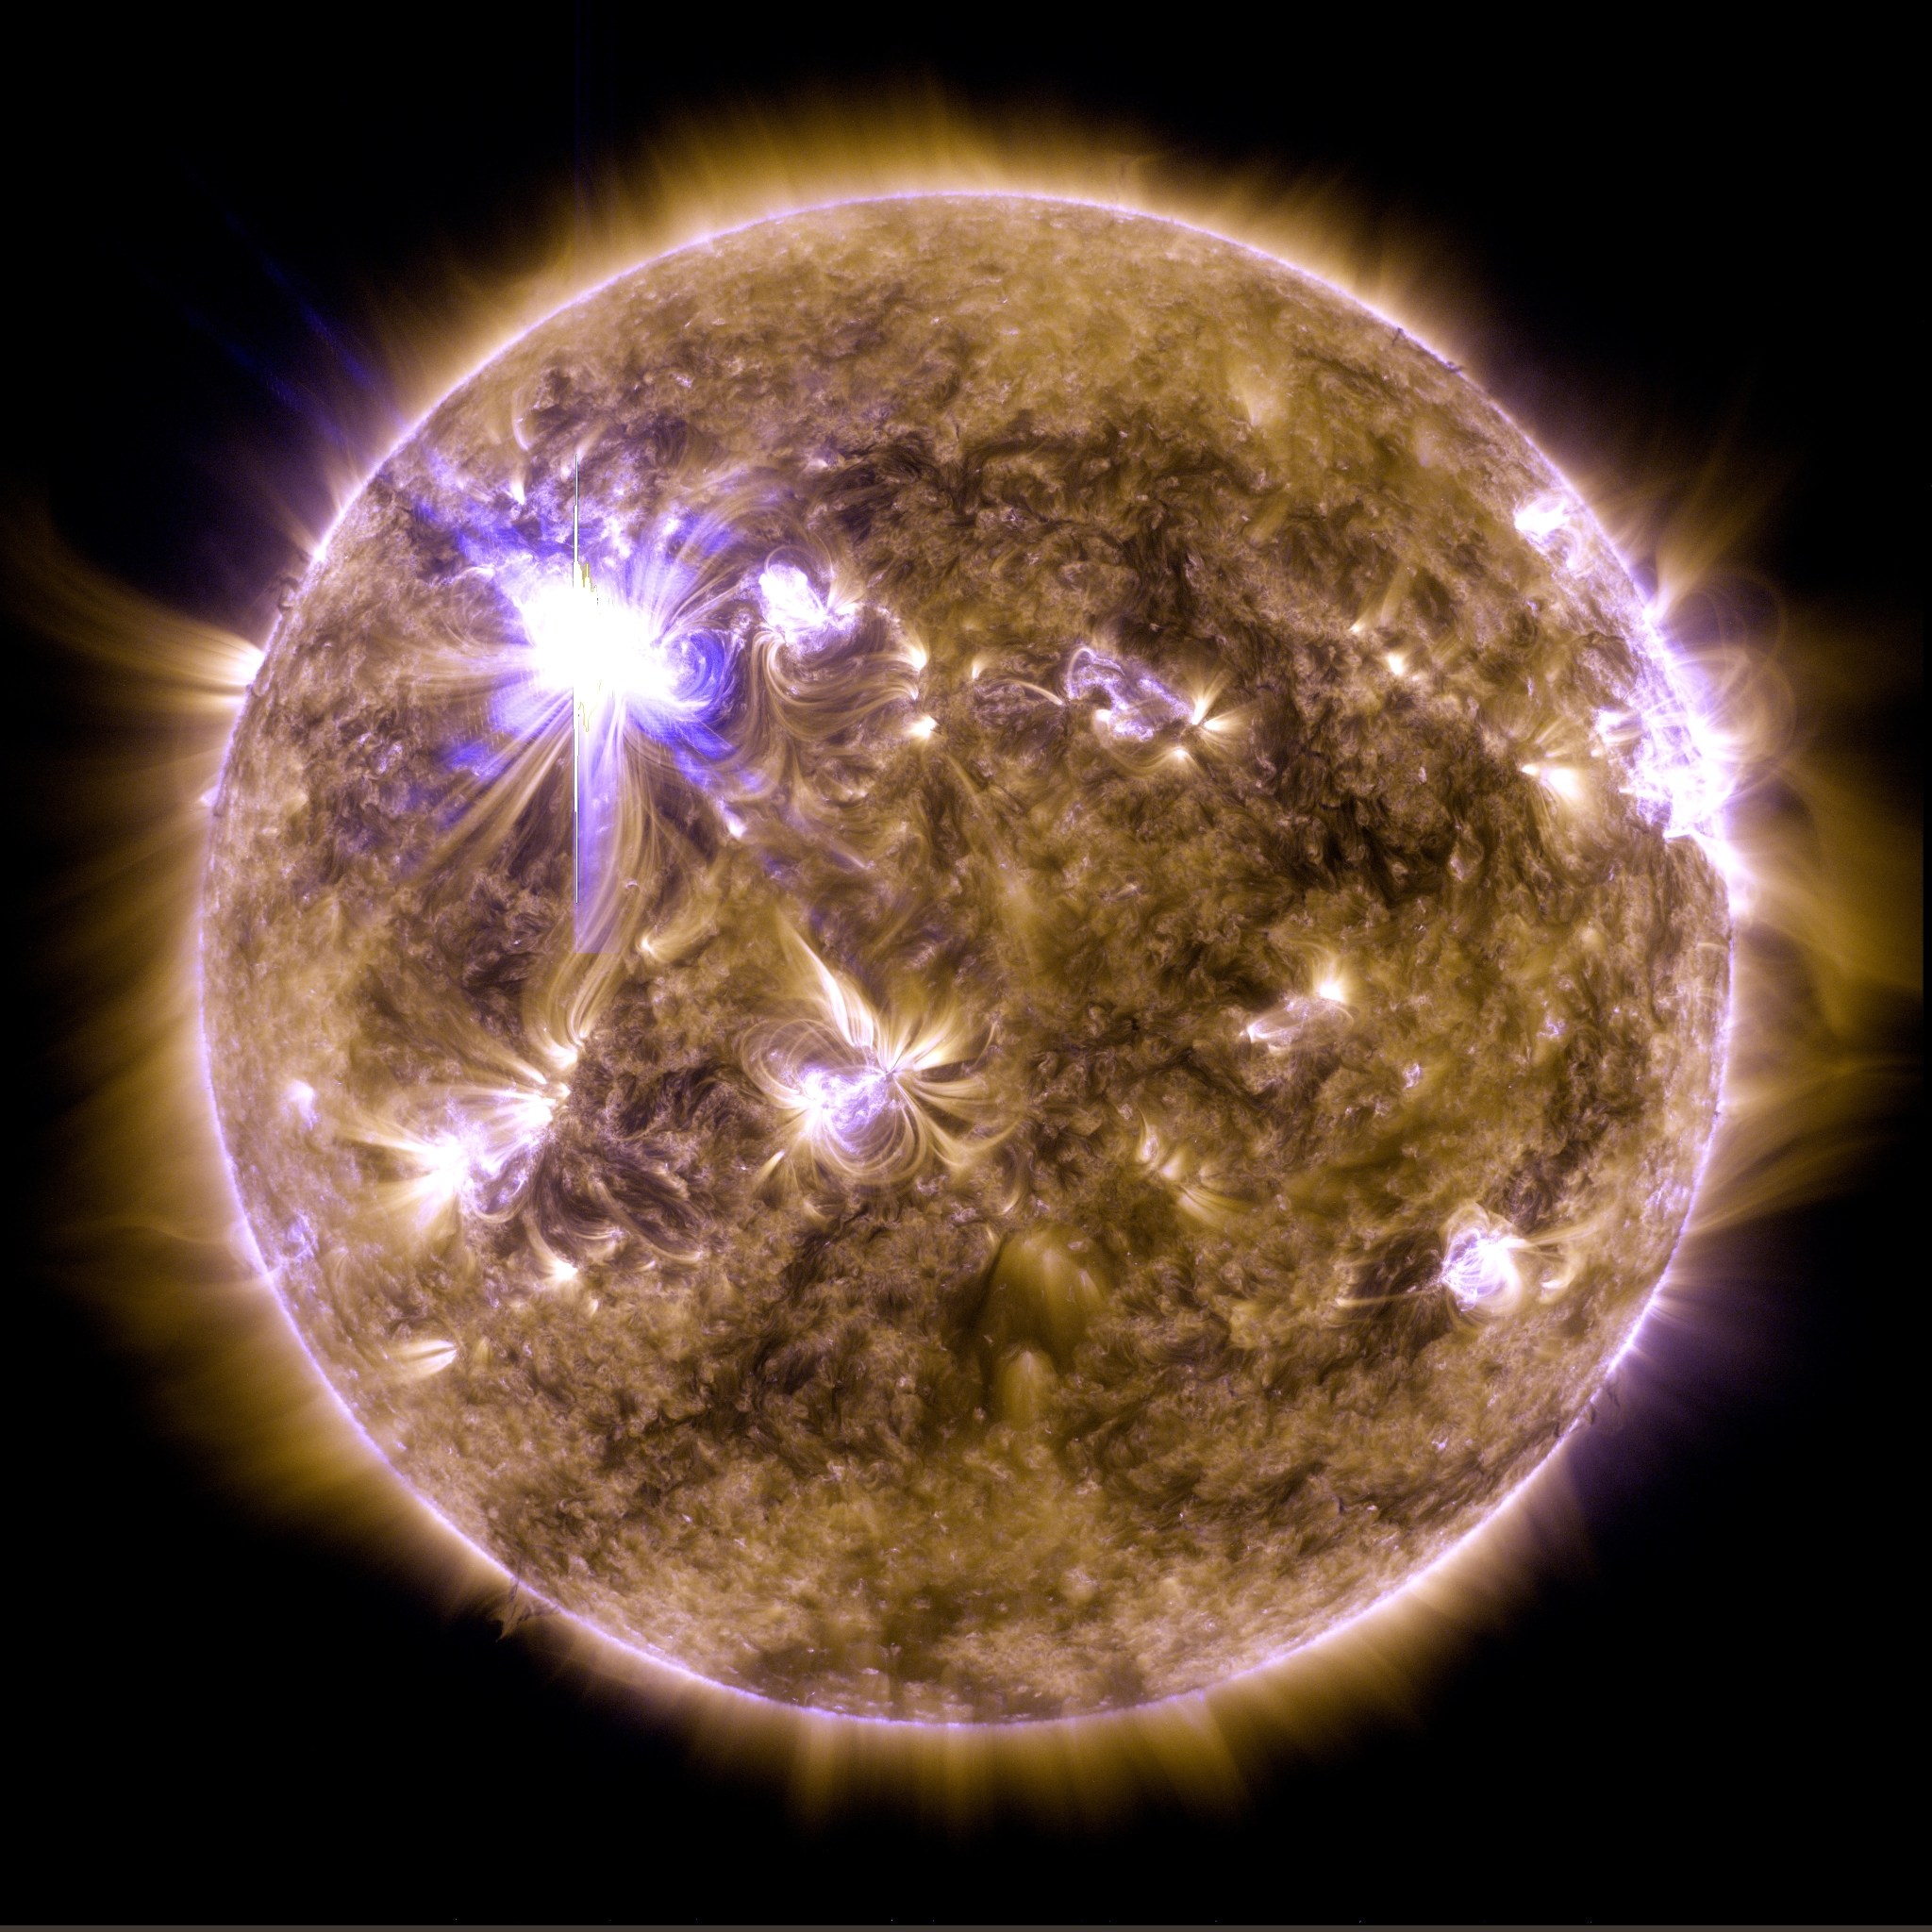 A satellite image shows the Sun colorized in gold and purple. A bright white burst of light shines in the upper left part of the Sun.